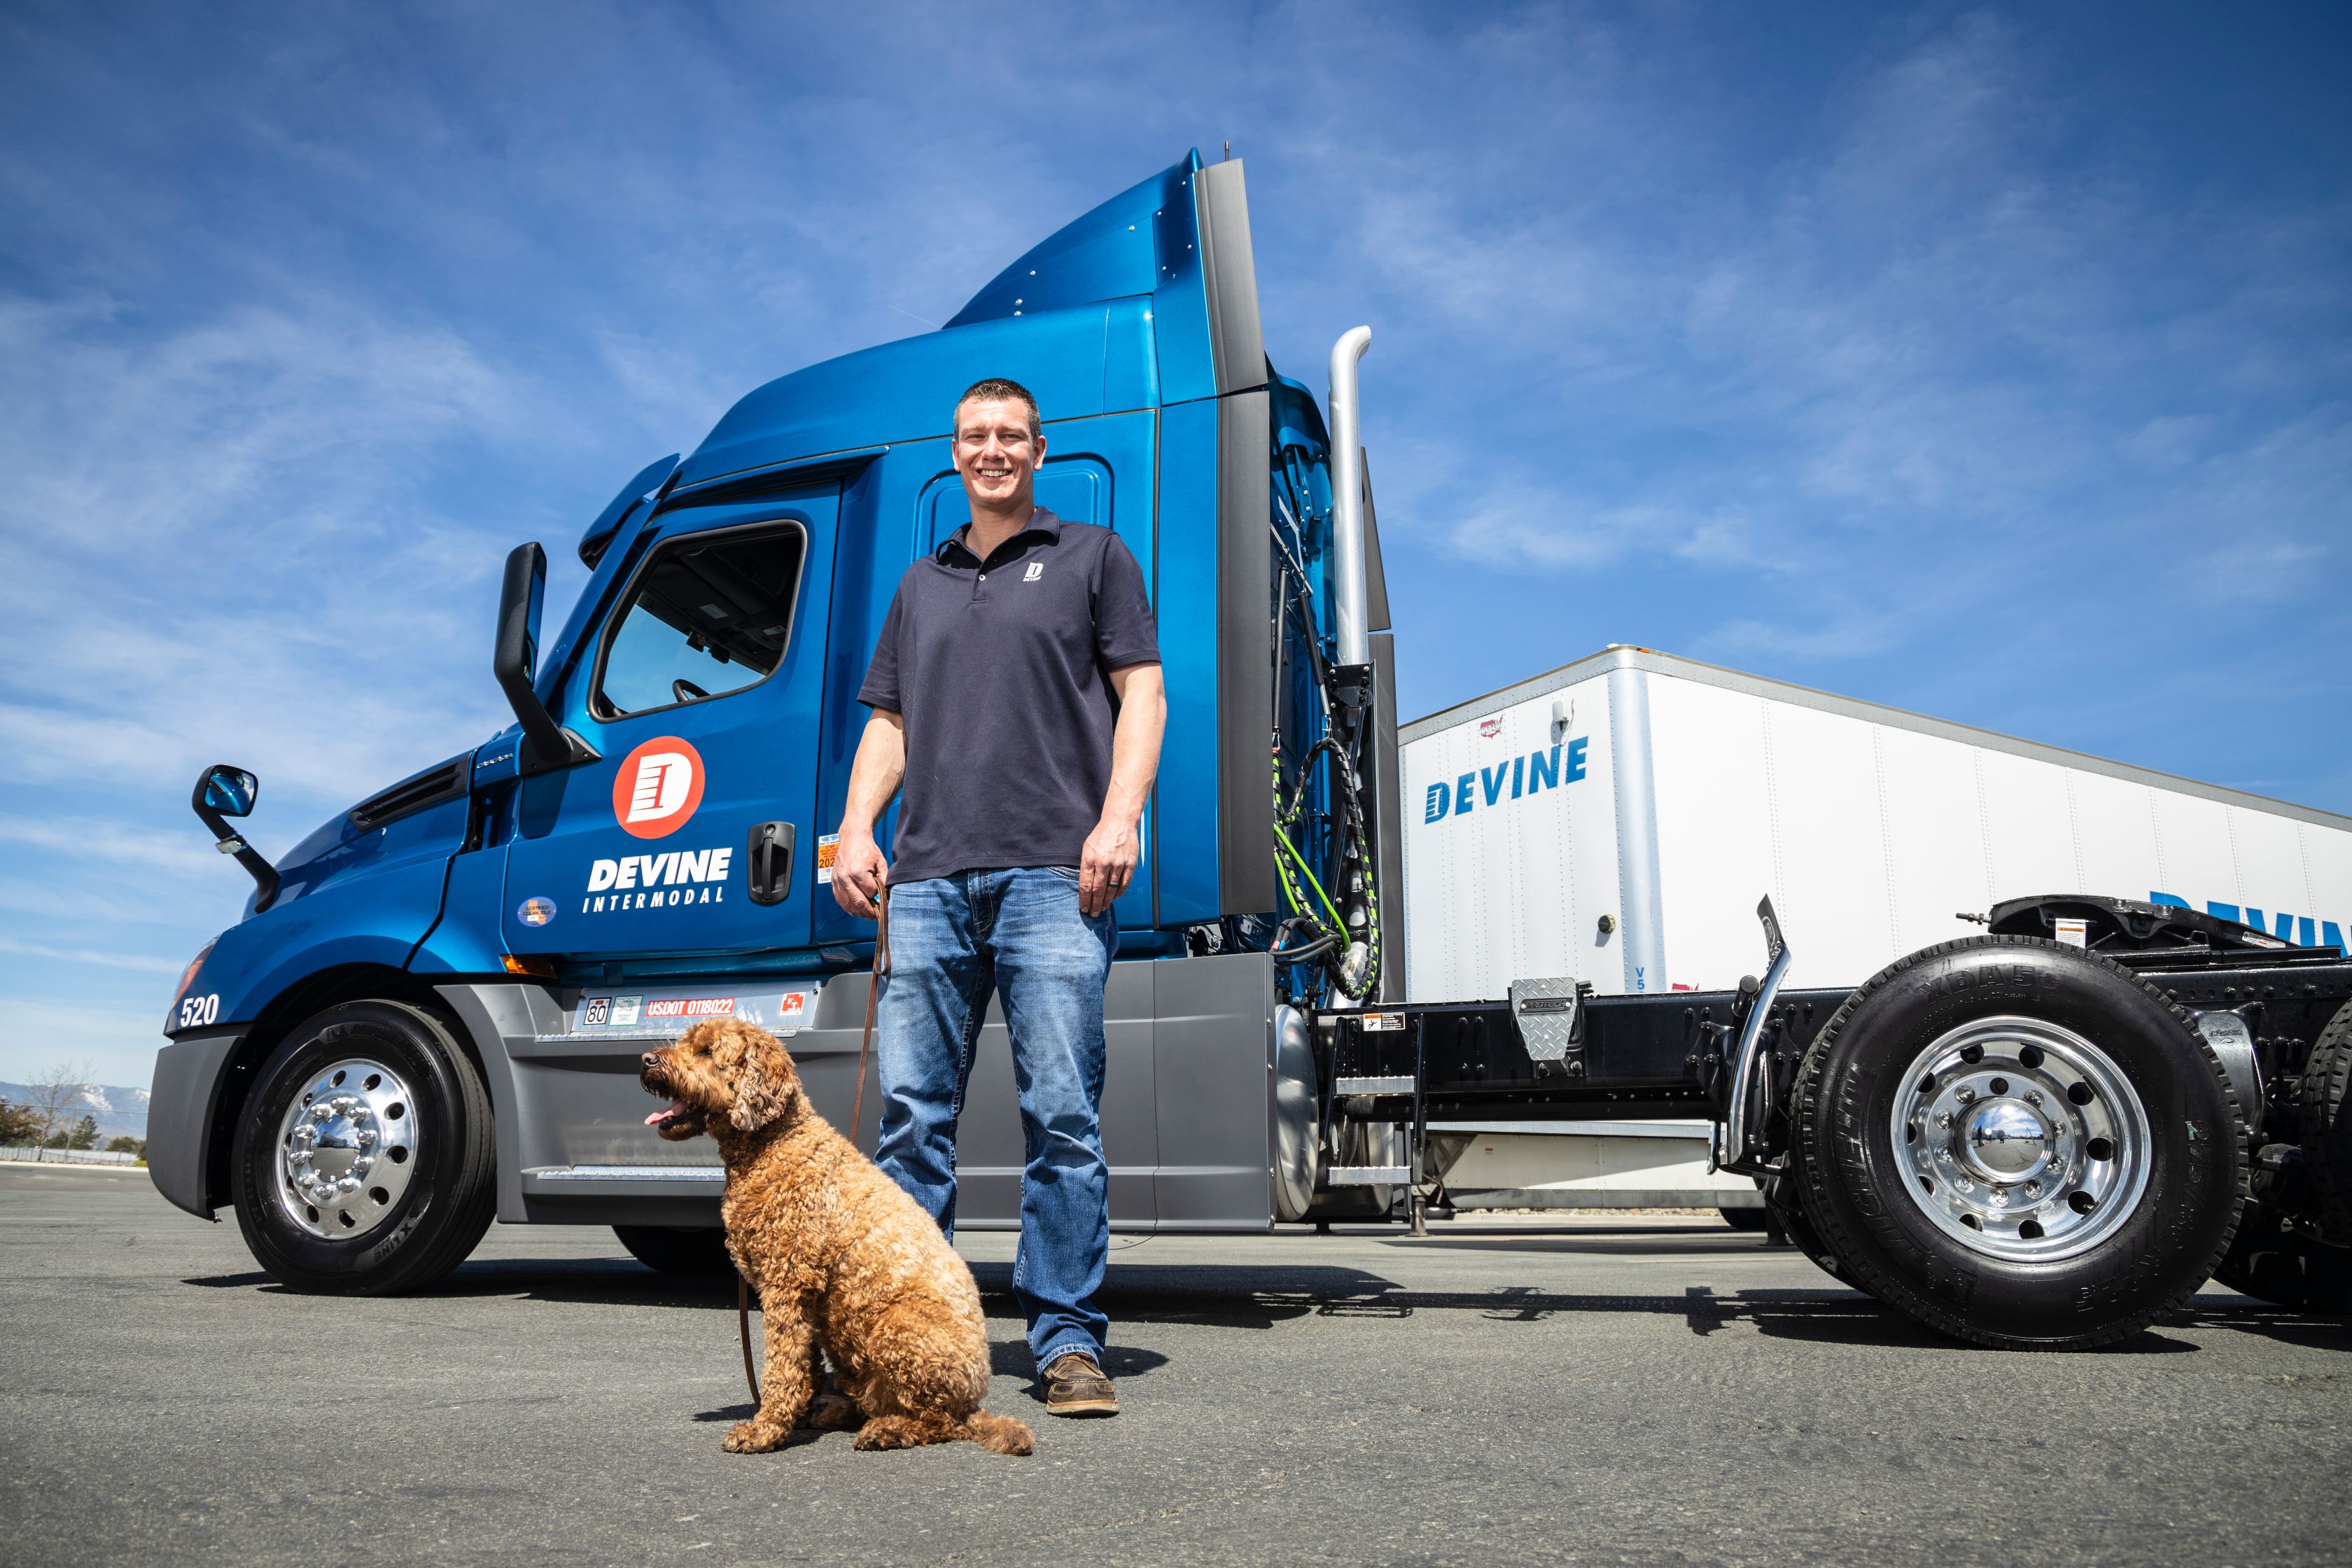 Devine Intermodal employee and dog standing in front of Devine truck